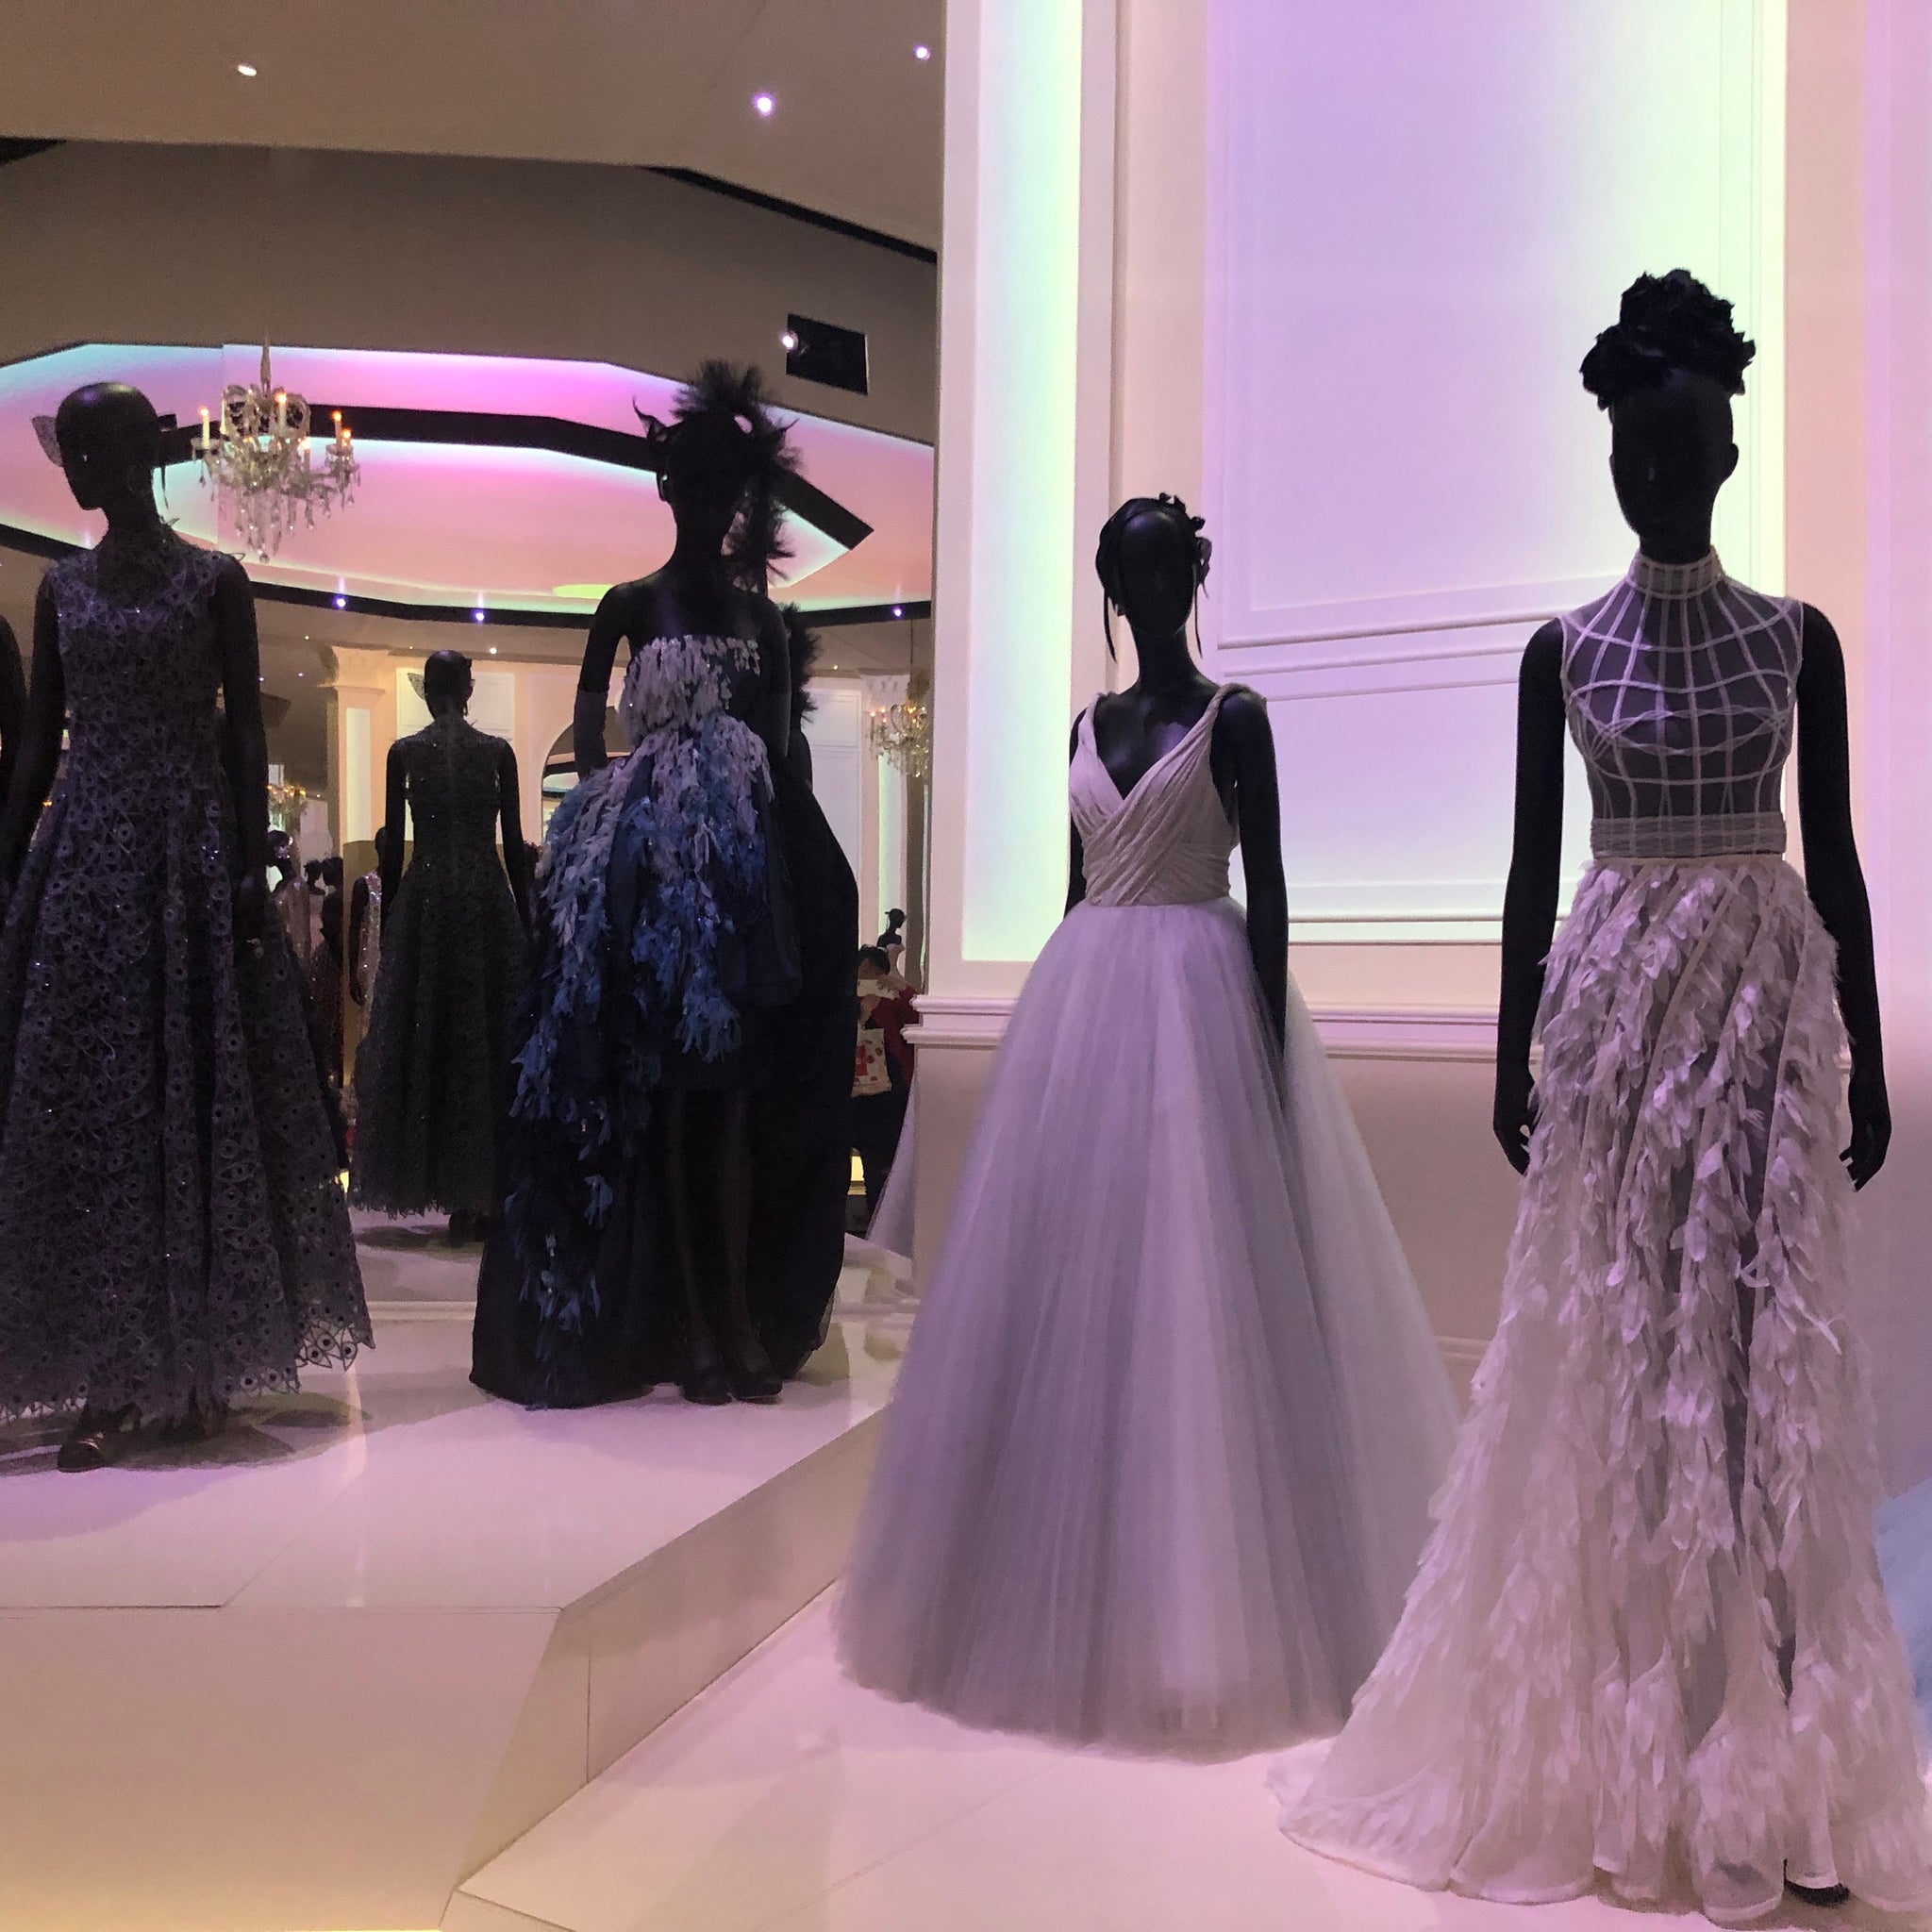 v&a dior opening times